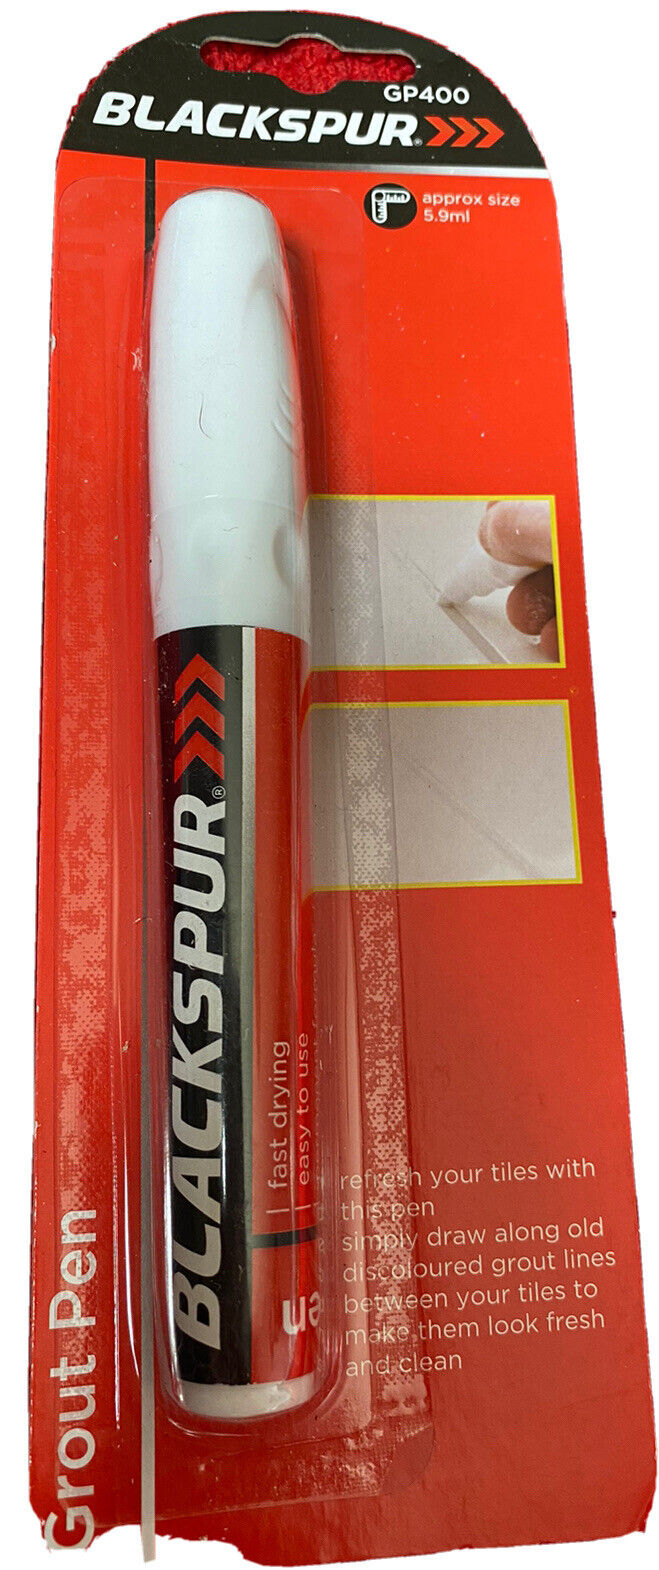 Blackspur Refresher White Grout Pen RRP 2.99 CLEARANCE XL 1.99